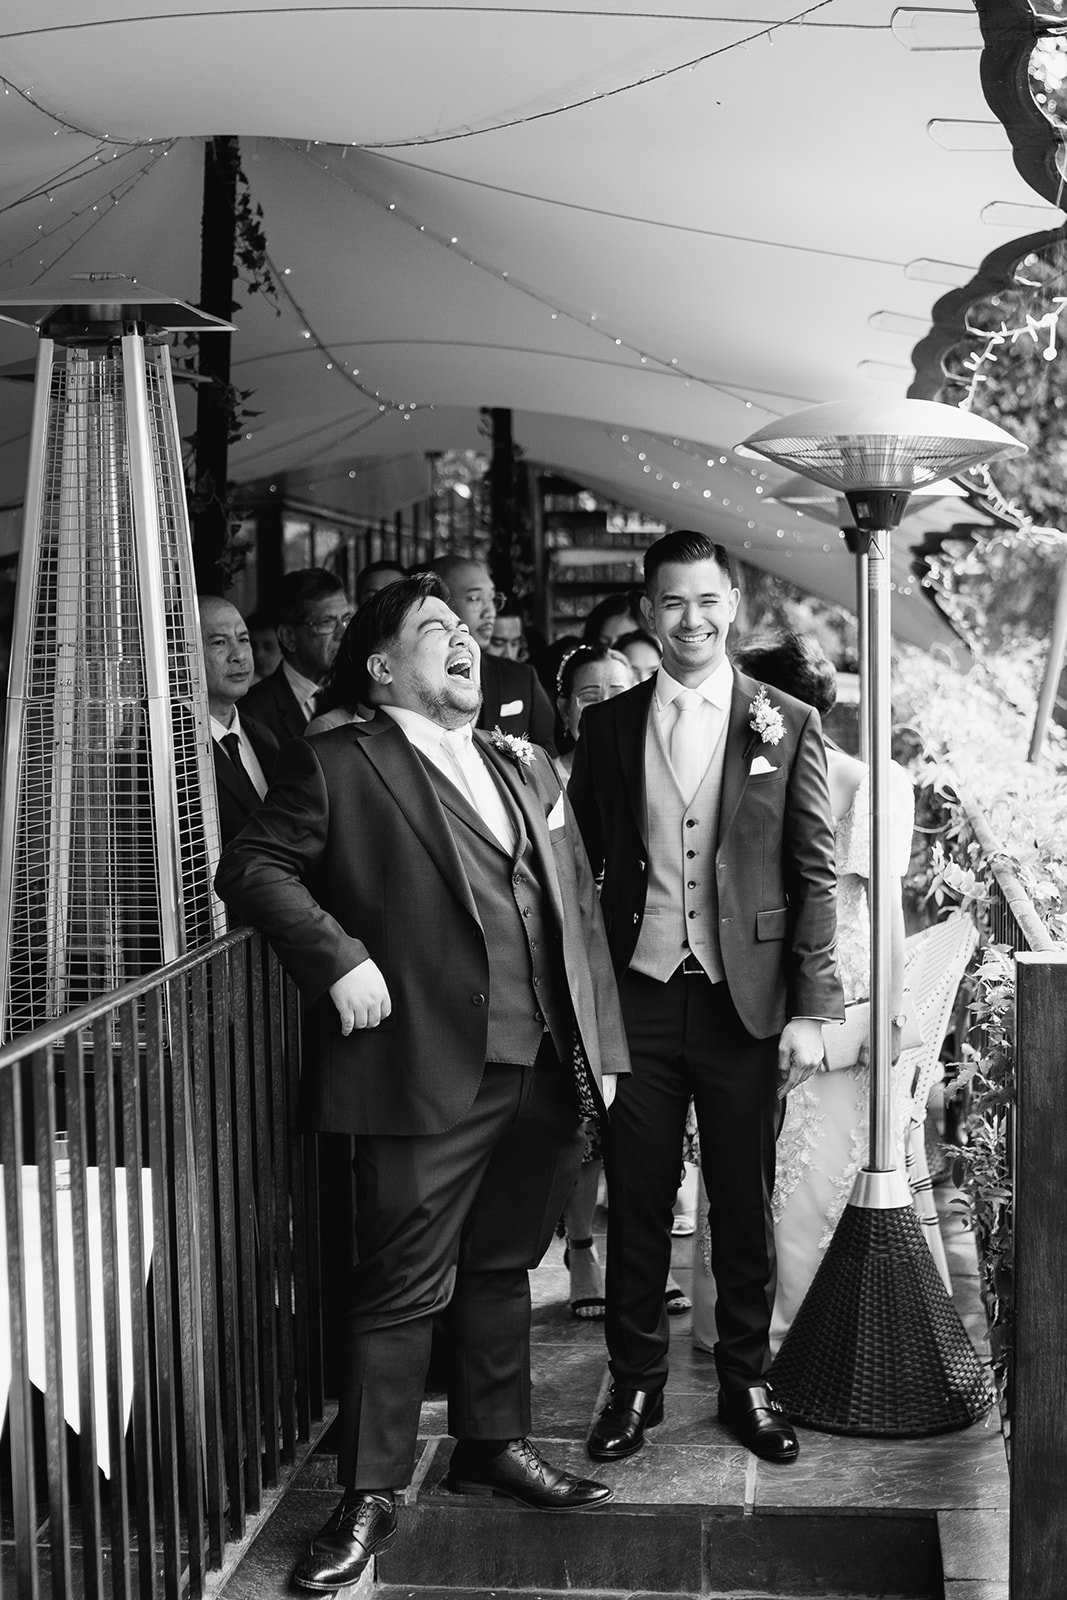 Groom and his best man captured in candid moment of laughter in black and white photograph